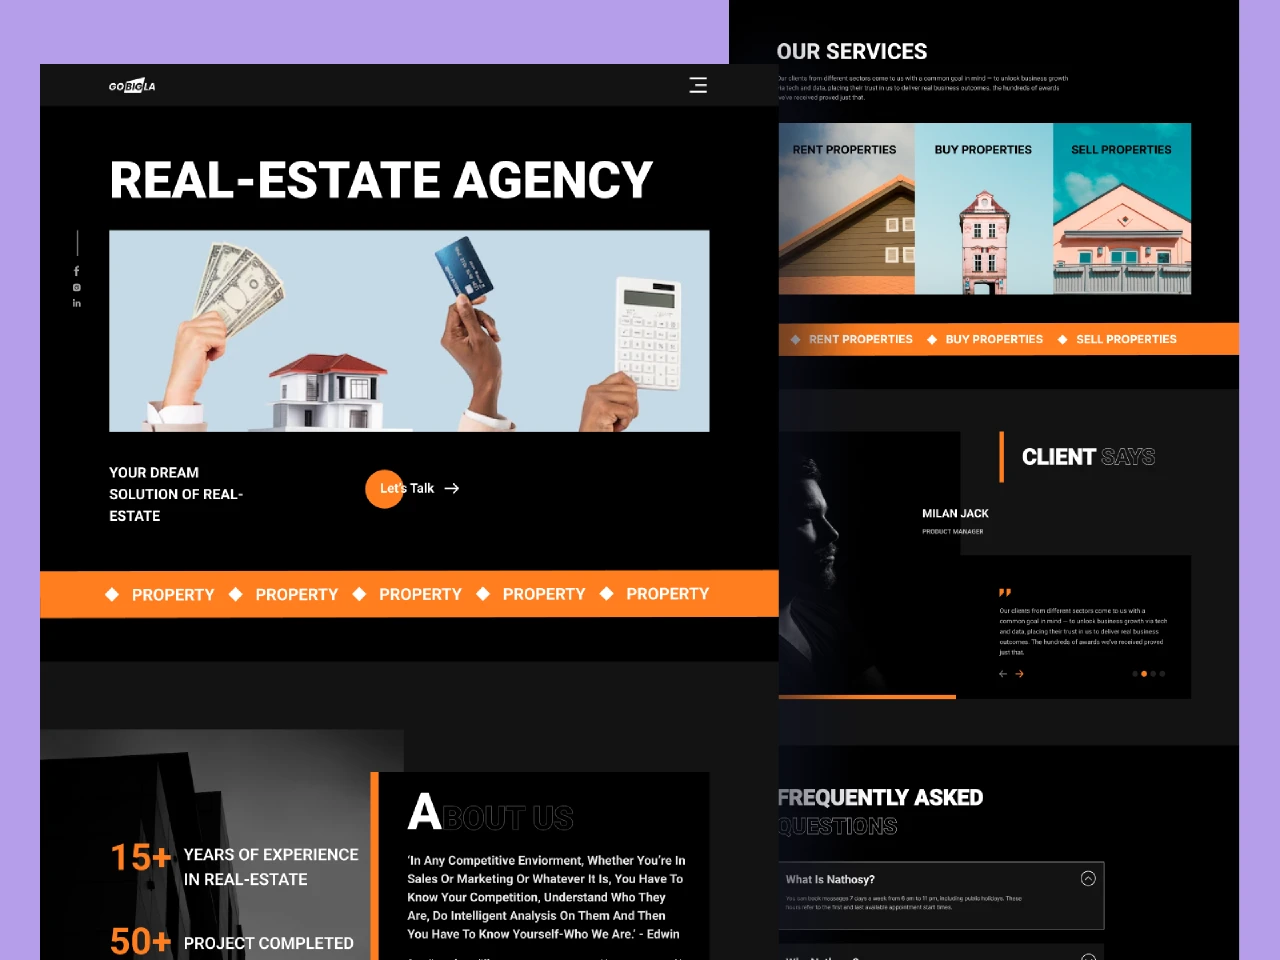 Real-Estate Agency Landing Page for Figma and Adobe XD